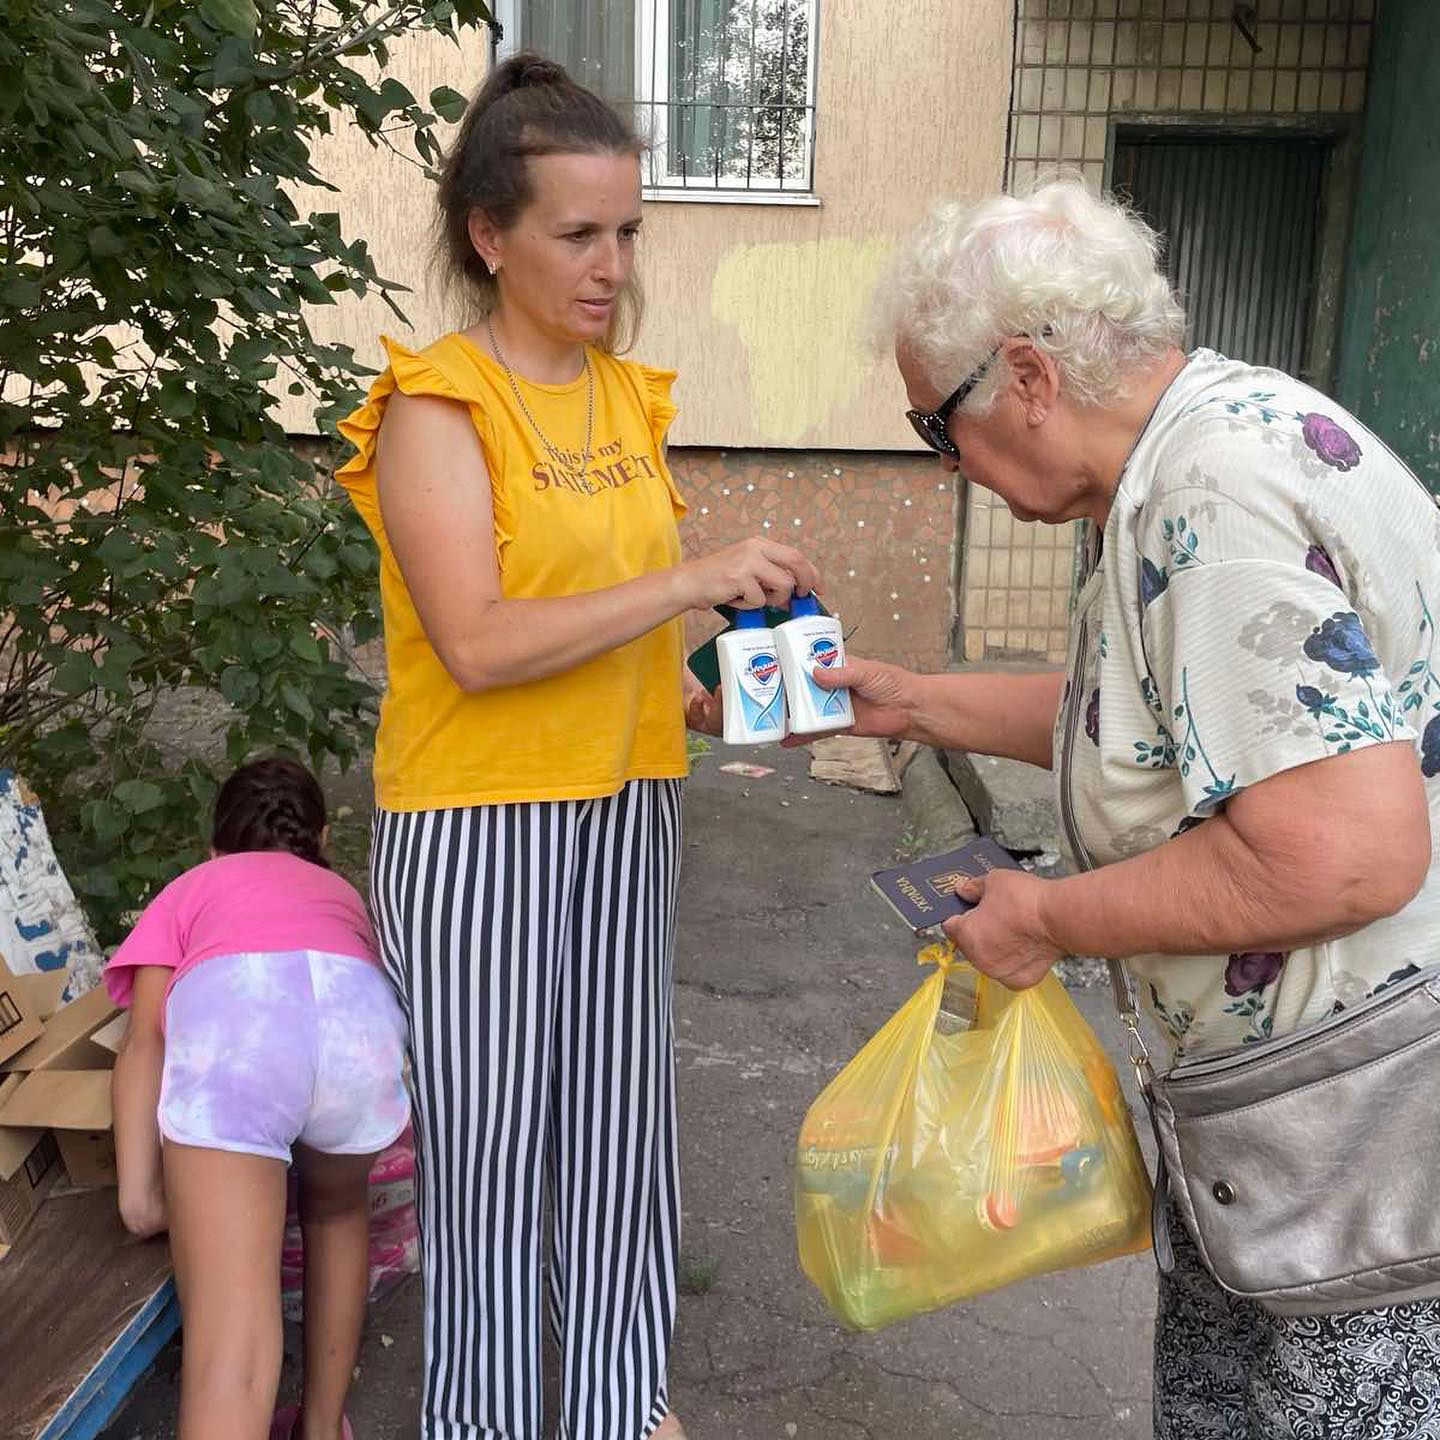 A woman handing a bag of food to a young girl.